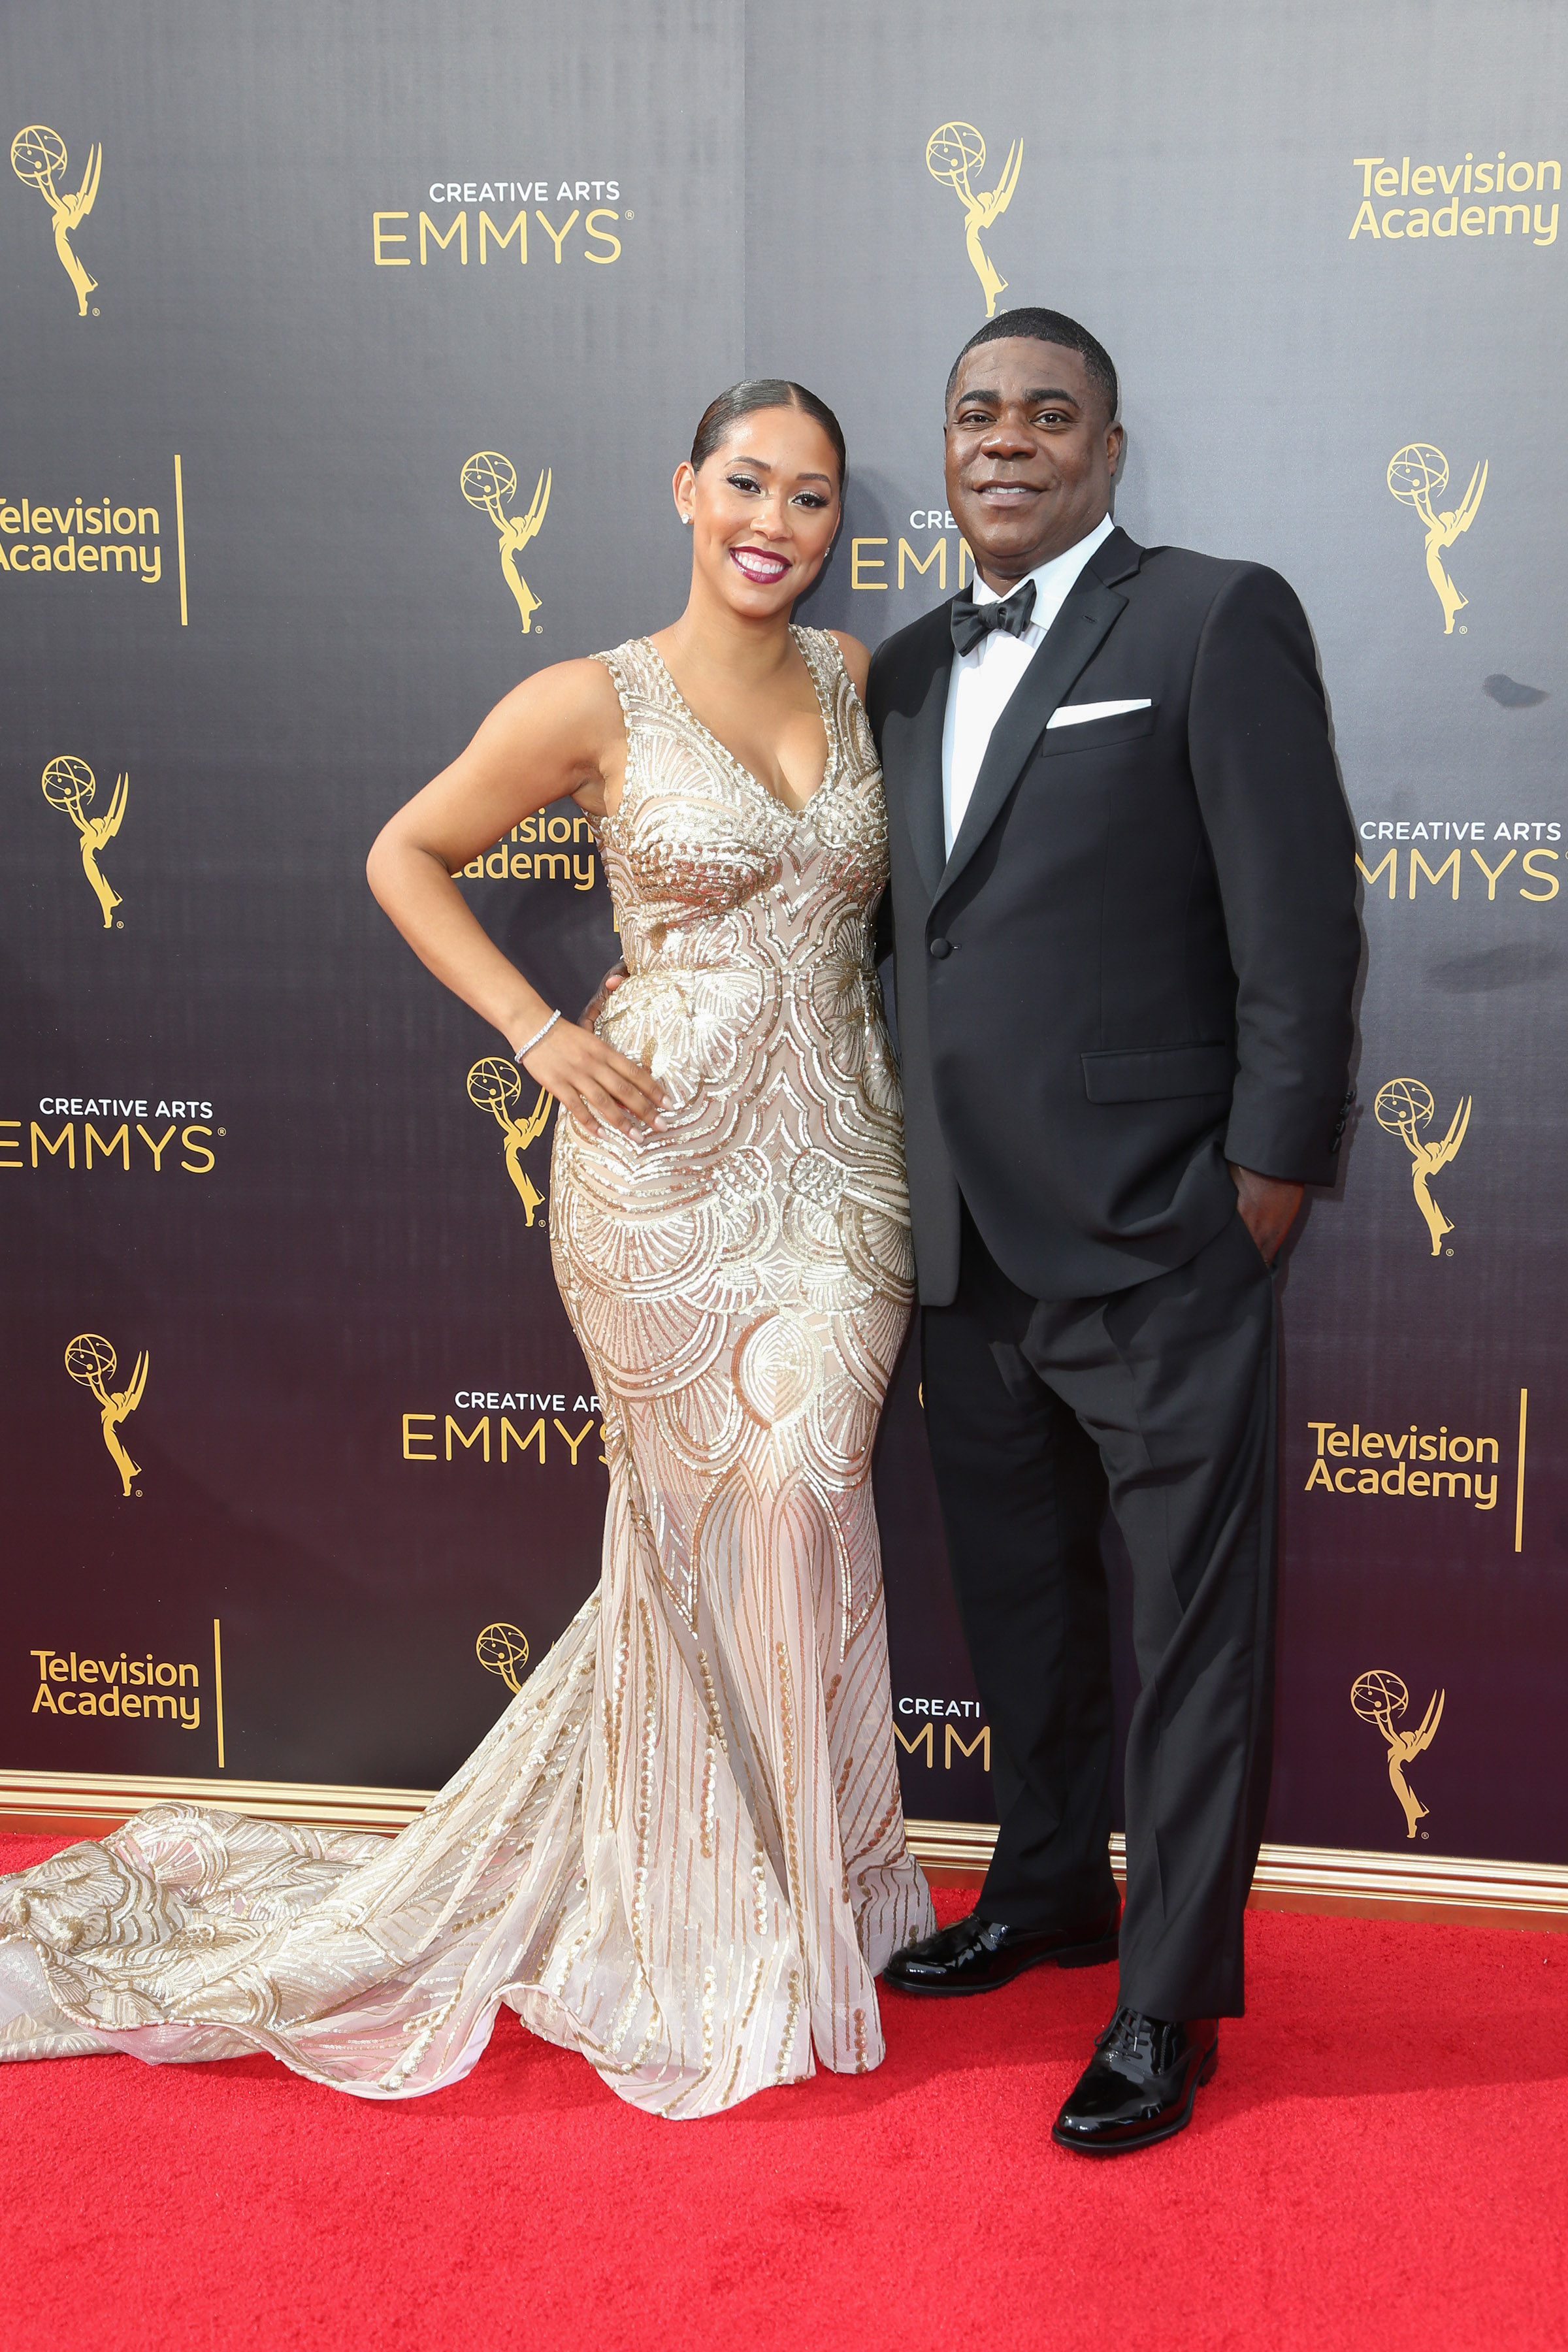 09/10/2016 - Tracy Morgan, Megan Wollover - 2016 Creative Arts Emmy Awards - Day 1 - Arrivals - Microsoft Theater, 777 Chick Hearn Court - Los Angeles, CA, USA - Keywords: Vertical, Award Show, Portrait, Photography, Arts Culture and Entertainment, Person, People, Celebrity, Celebrities, Annual Event, Attending, Appearance, Red Carpet Event, Topix, Bestof, California Orientation: Portrait Face Count: 1 - False - Photo Credit: PRPhotos.com - Contact (1-866-551-7827) - Portrait Face Count: 1